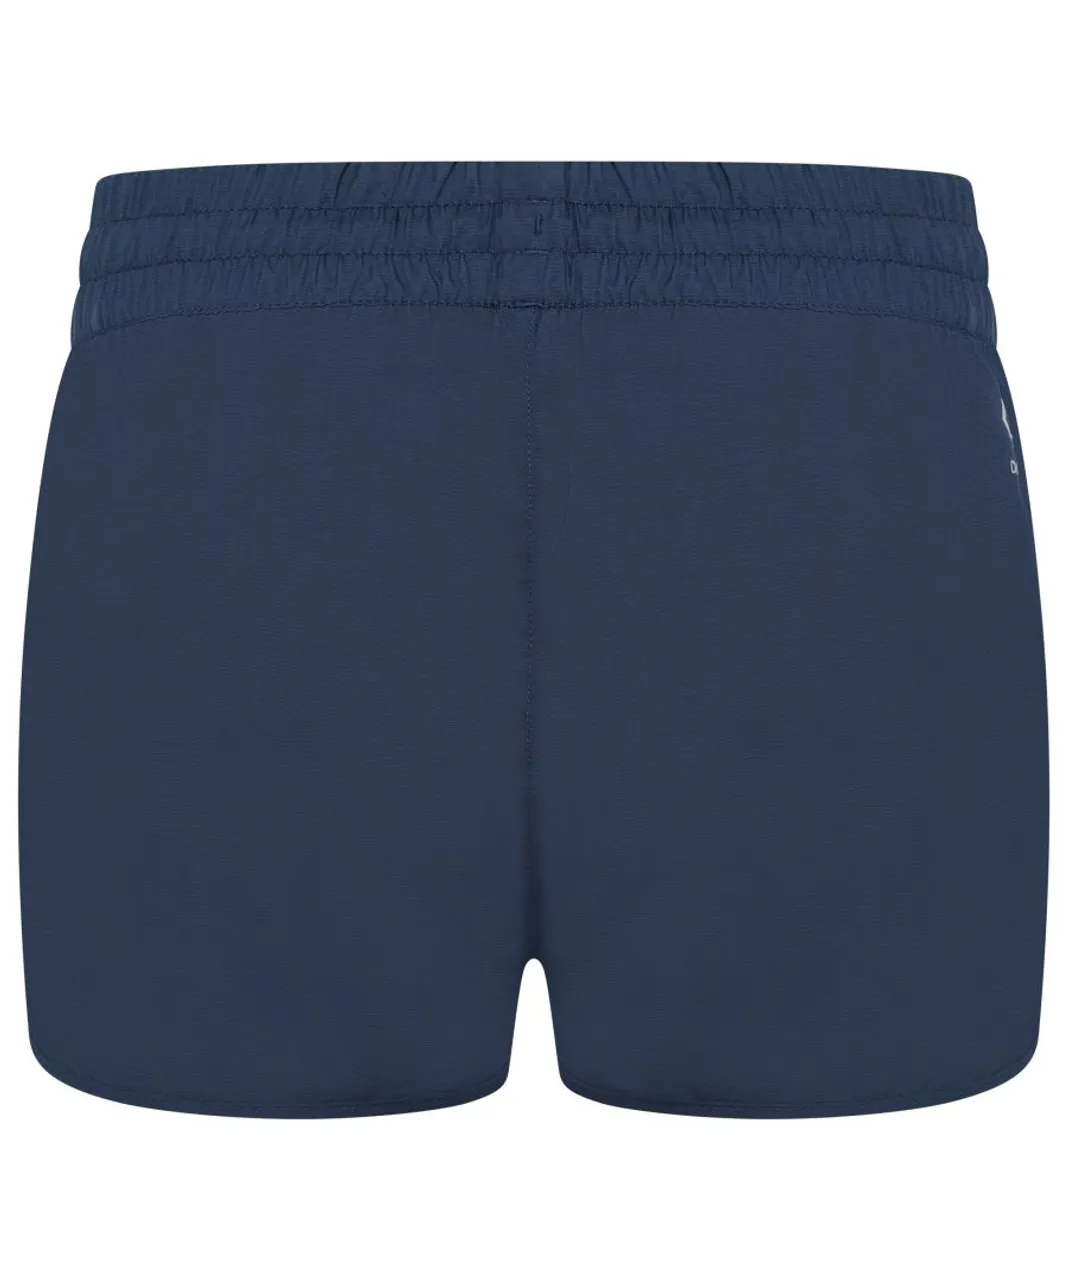 Dare 2B Womens/Ladies The Laura Whitmore Edit Sprint Up 2 in 1 Shorts (Moonlight Denim/Feather Grey) - Blue